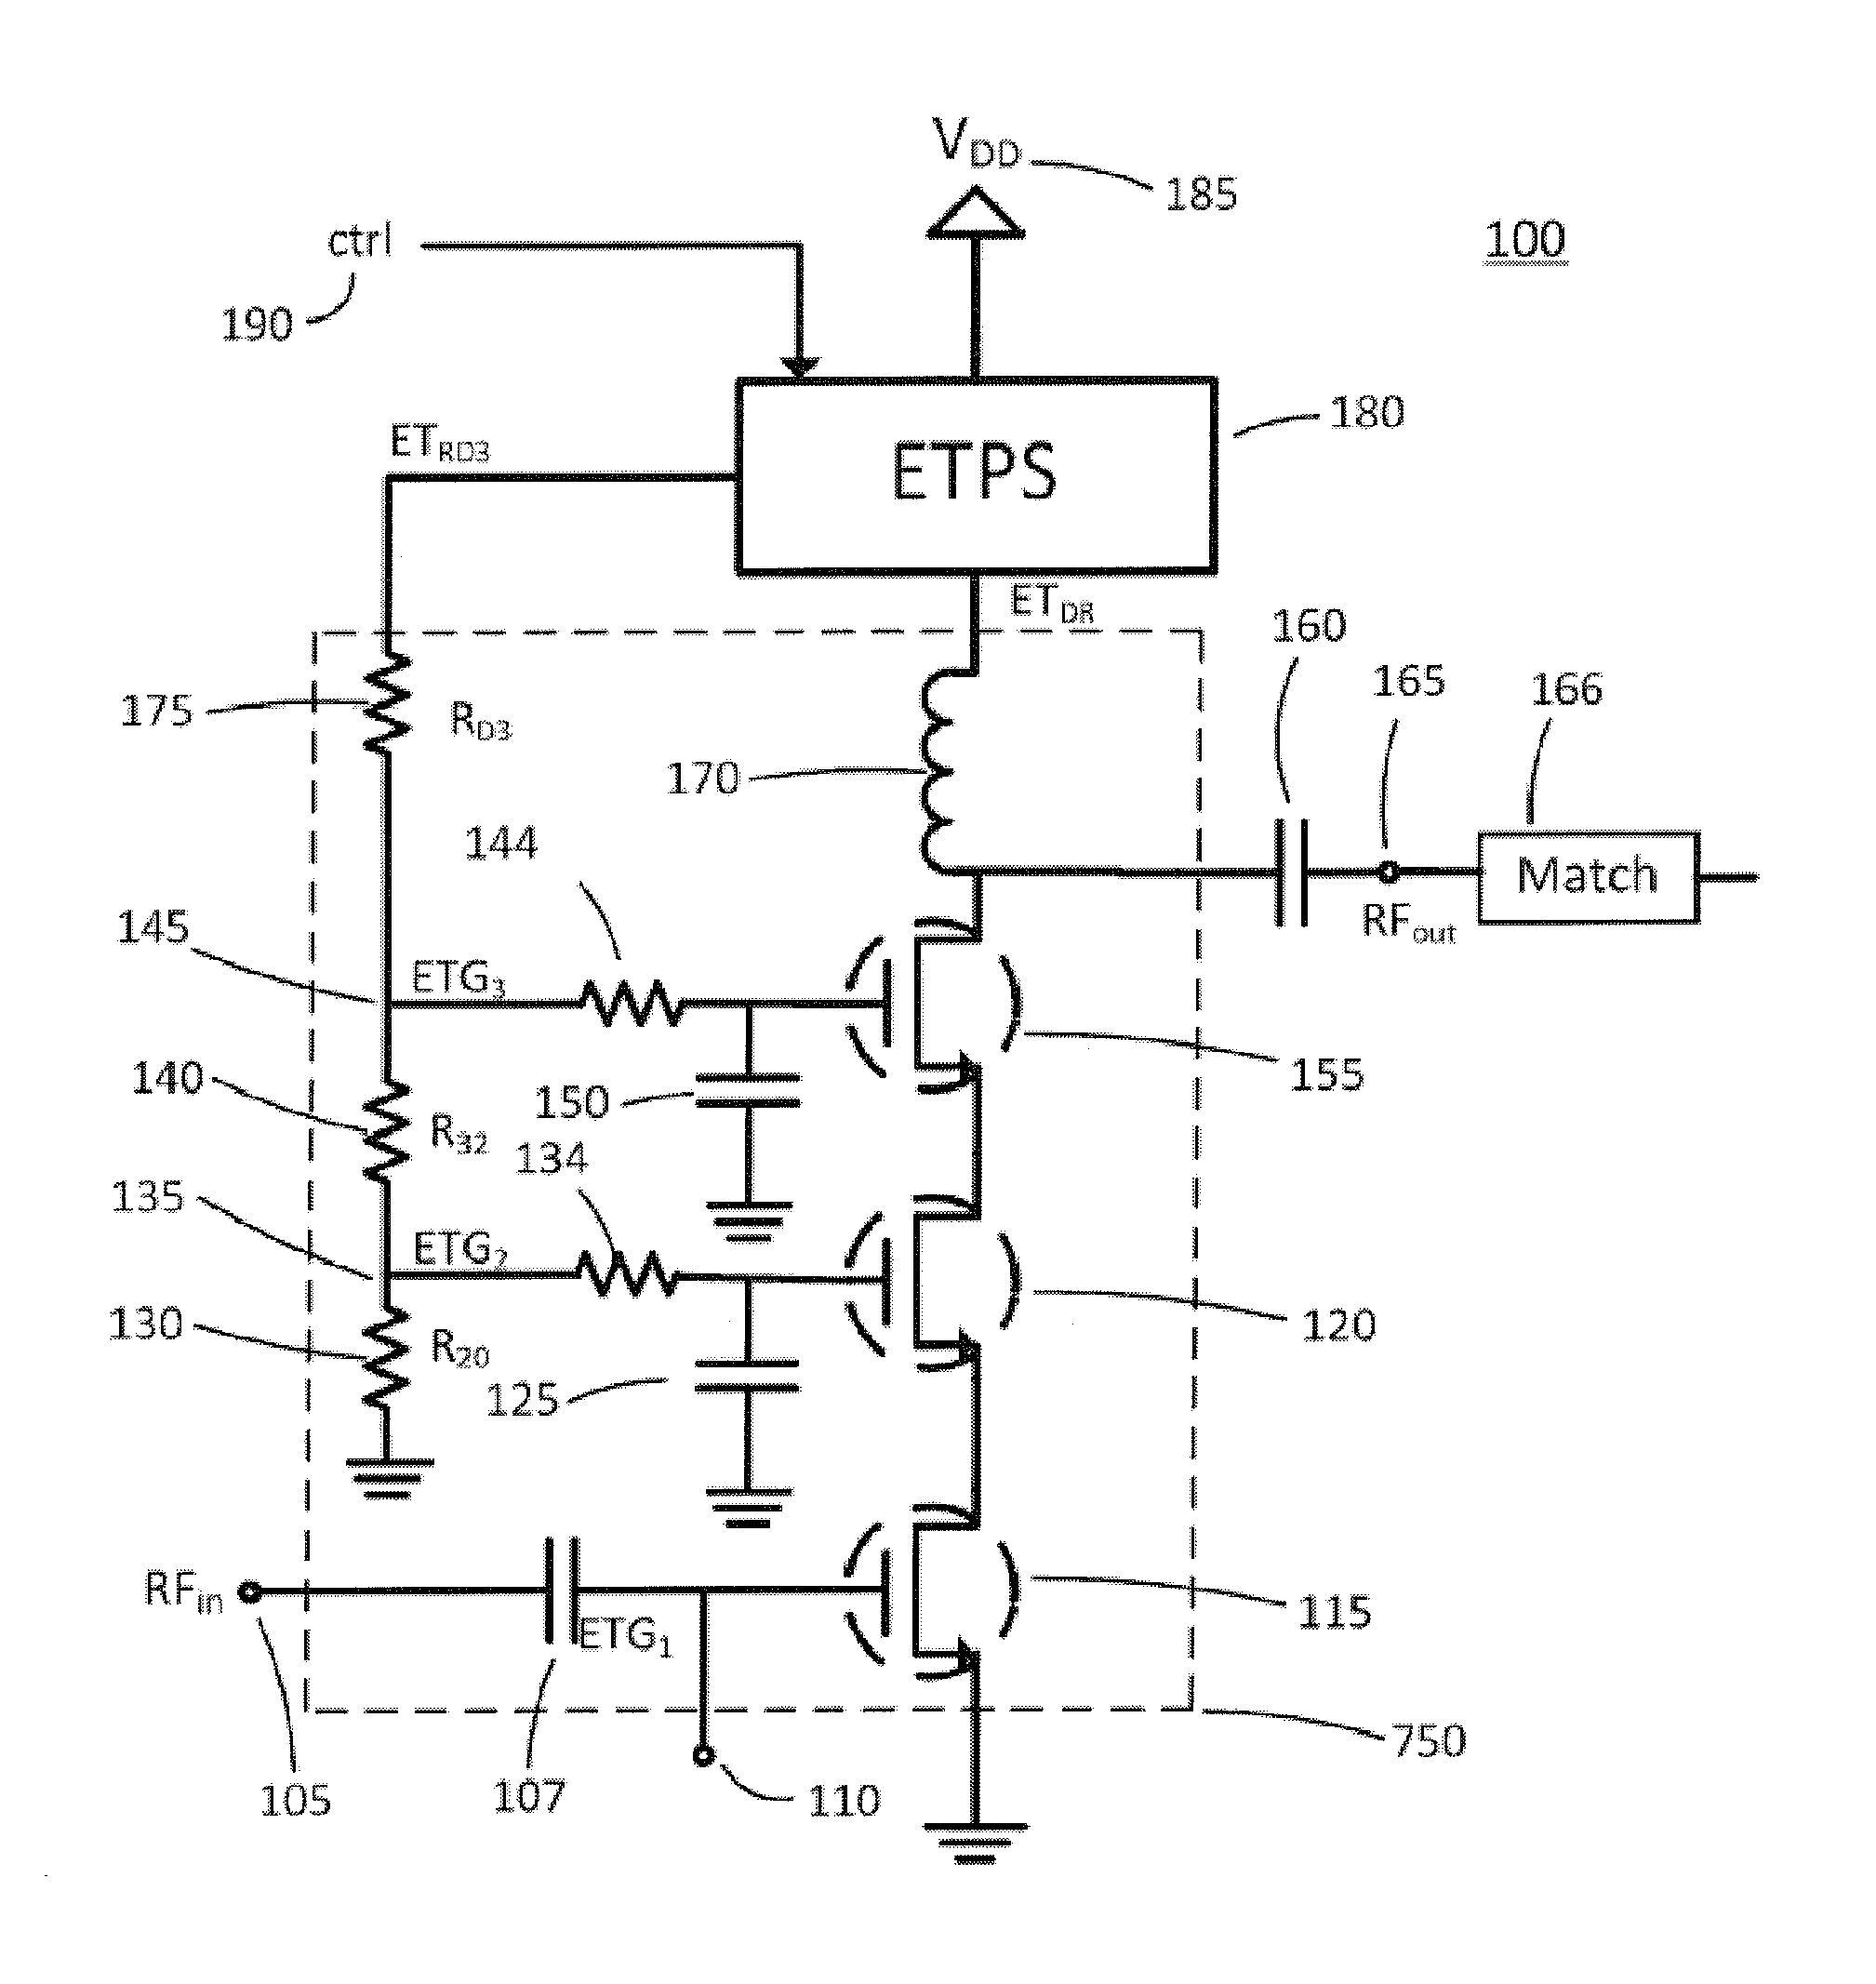 Control Systems and Methods for Power Amplifiers Operating in Envelope Tracking Mode